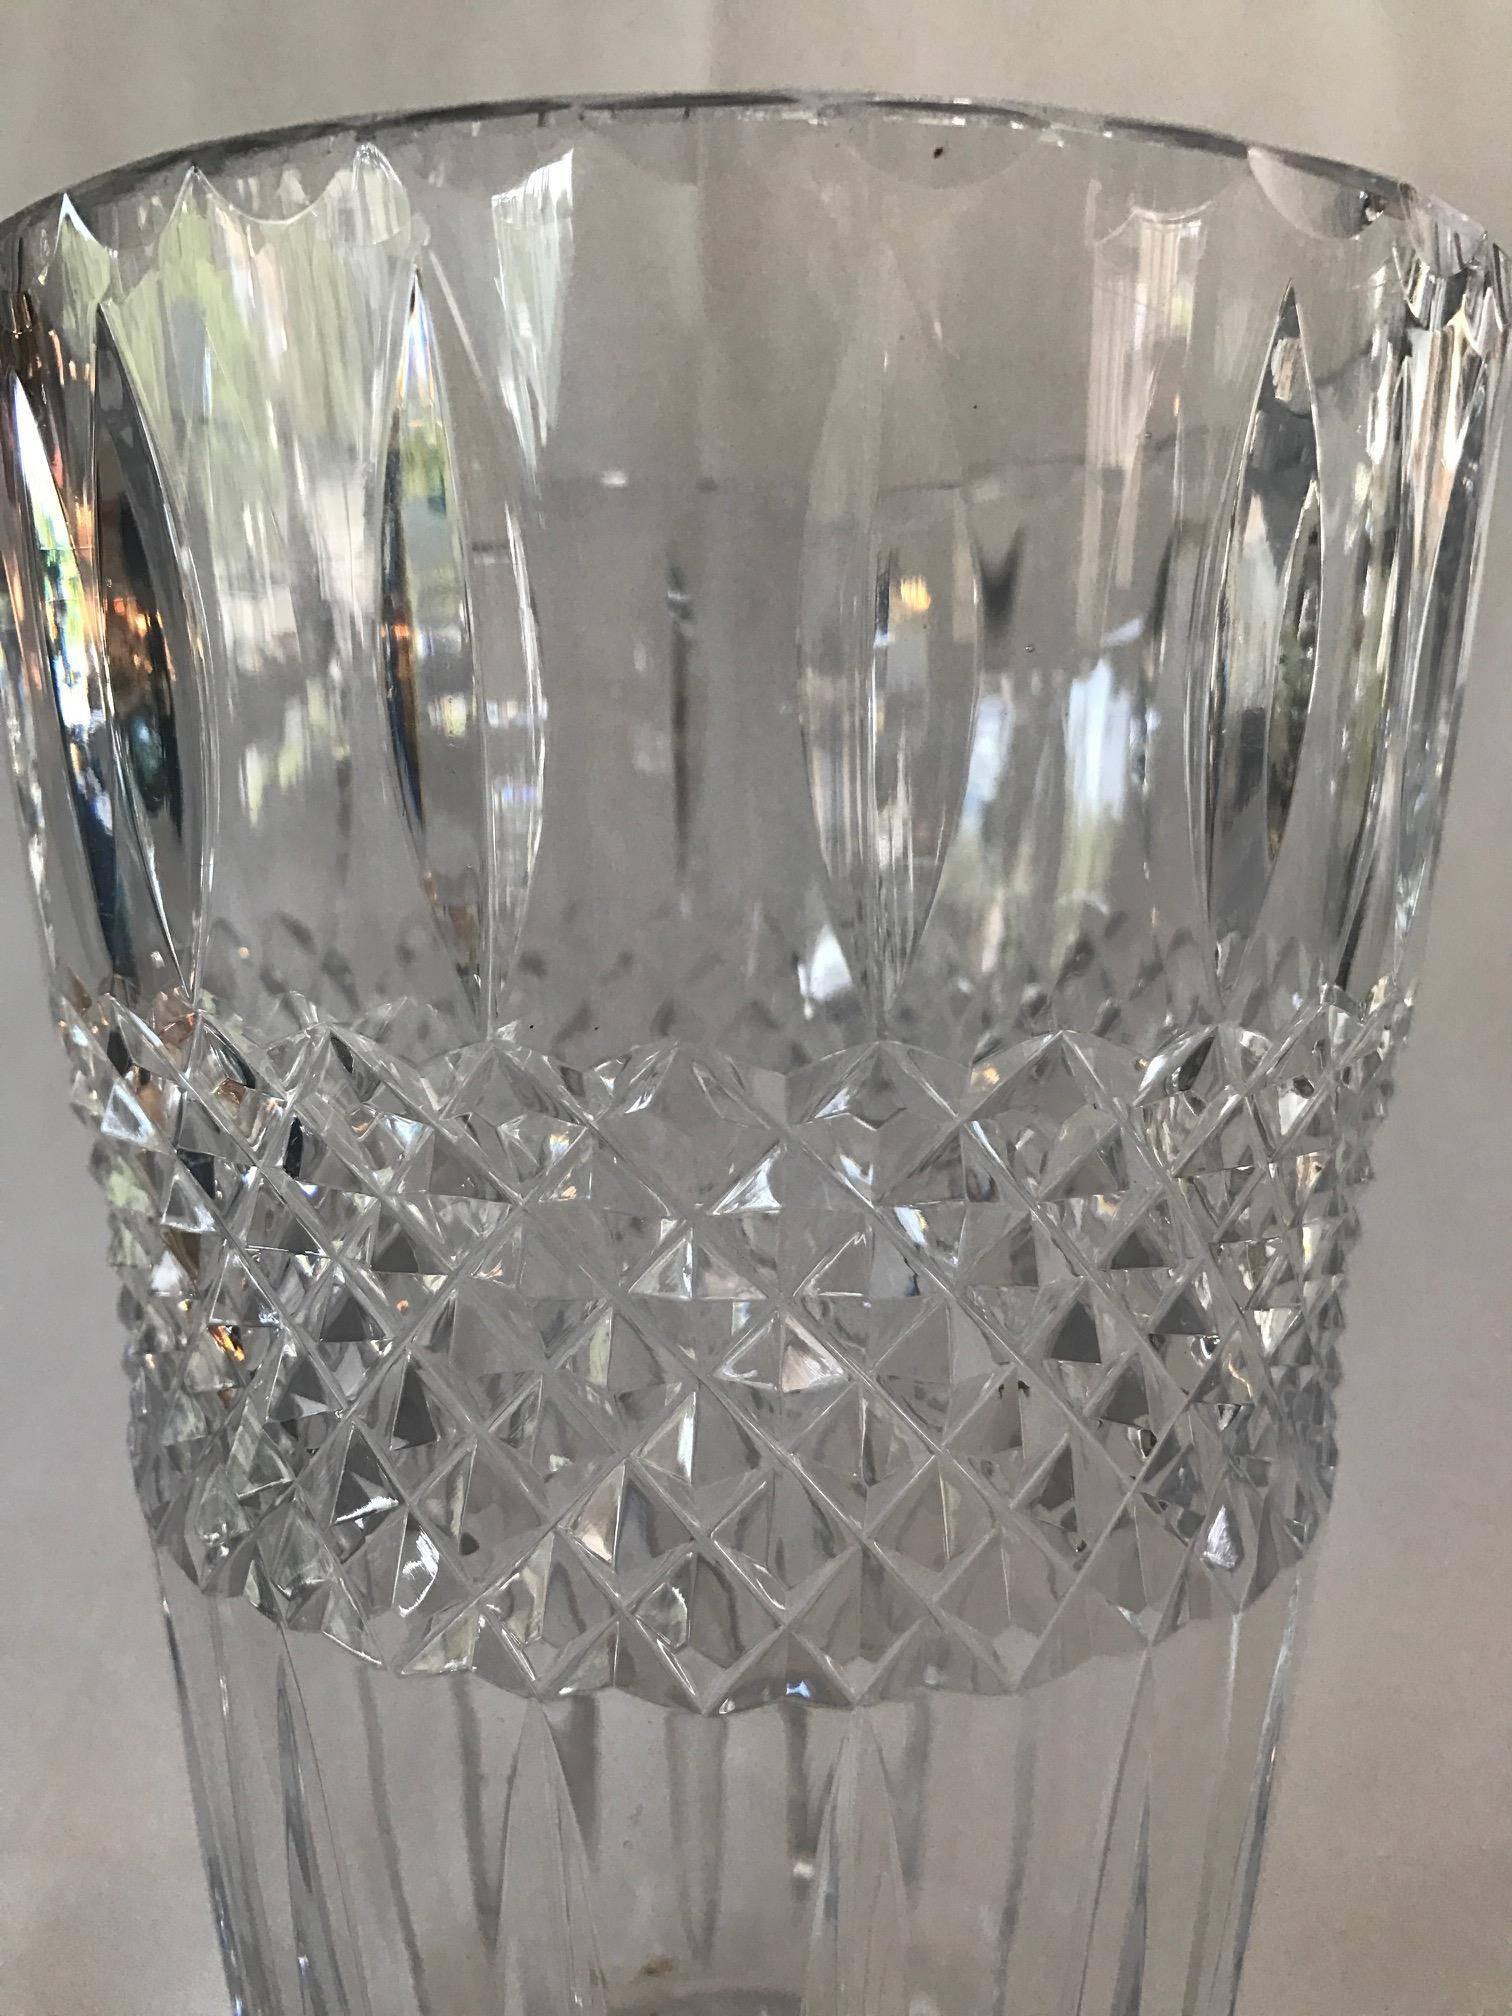 1930s cut cross hatched crystal vase. Old English mid-20th century. Beautiful piece. No chips or dings.